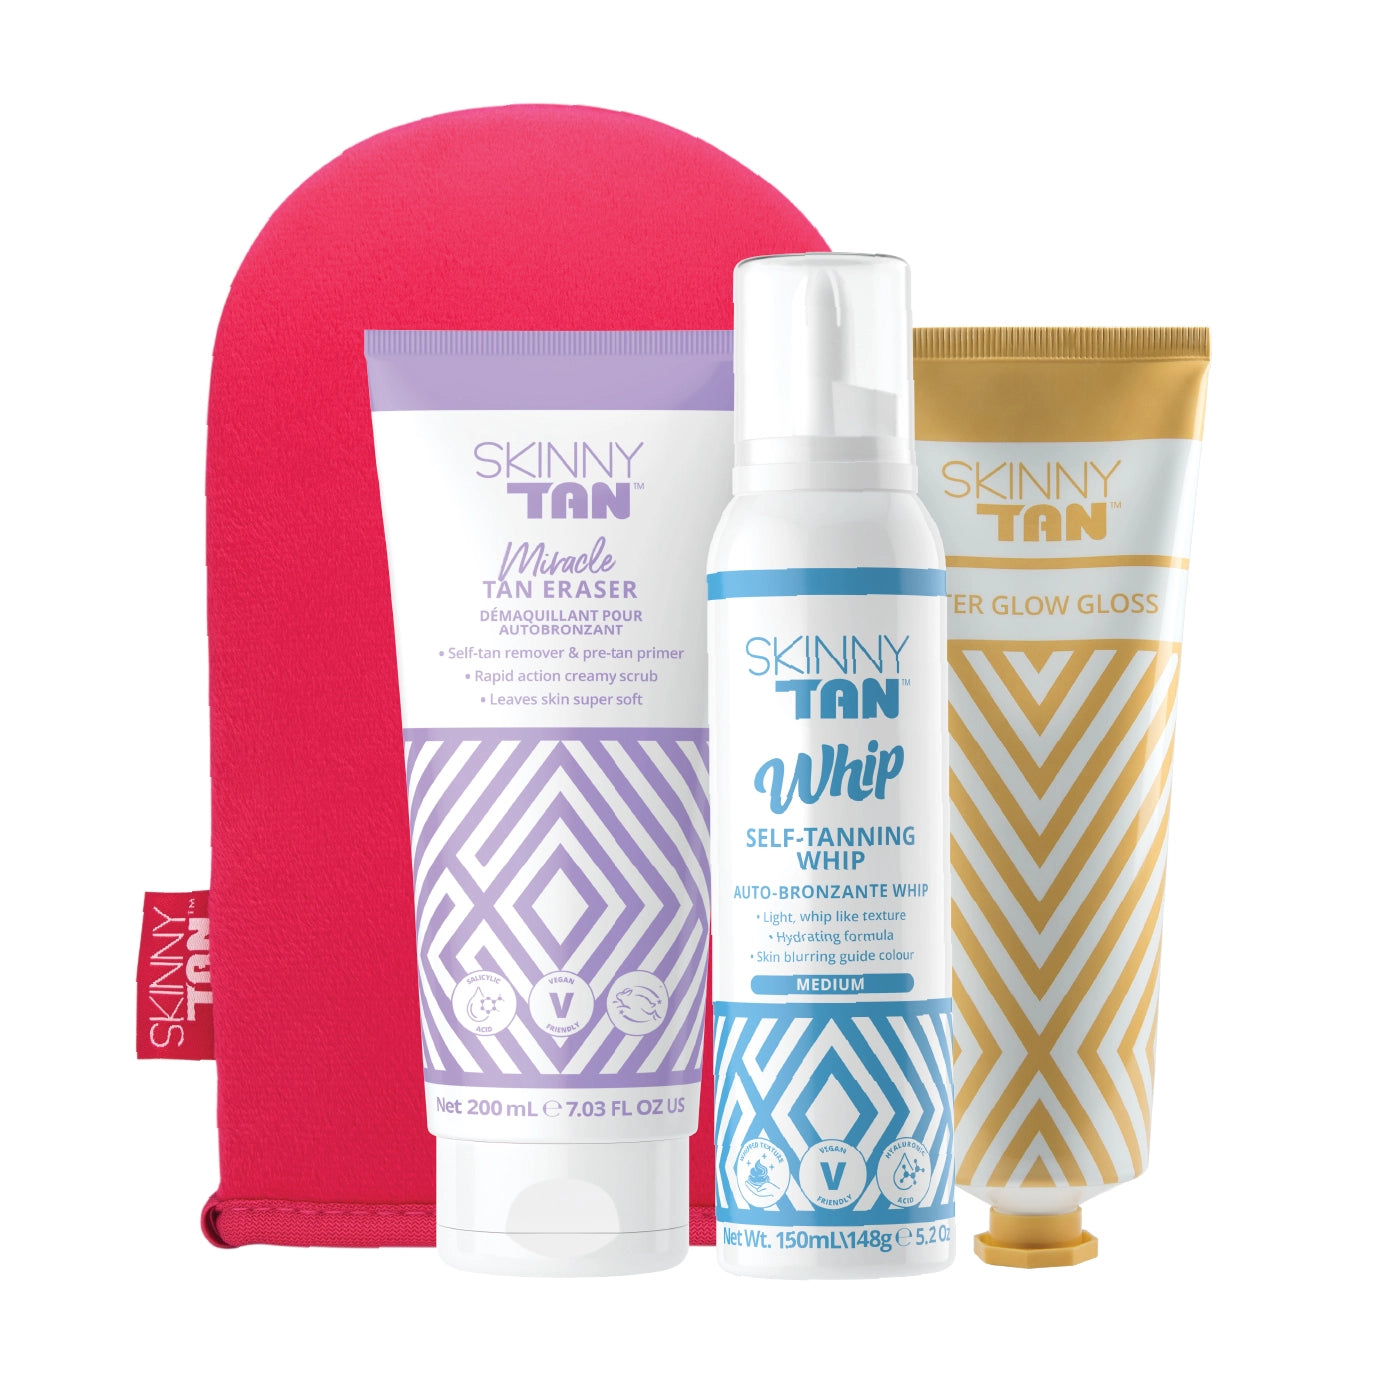 All Whipped up Skinny Tan fake tan bundle product image includes Self Tanning Whip (medium or dark), Miracle Tan Eraser, After Glow Gloss and a Pink Velvet Tanning Application mitt